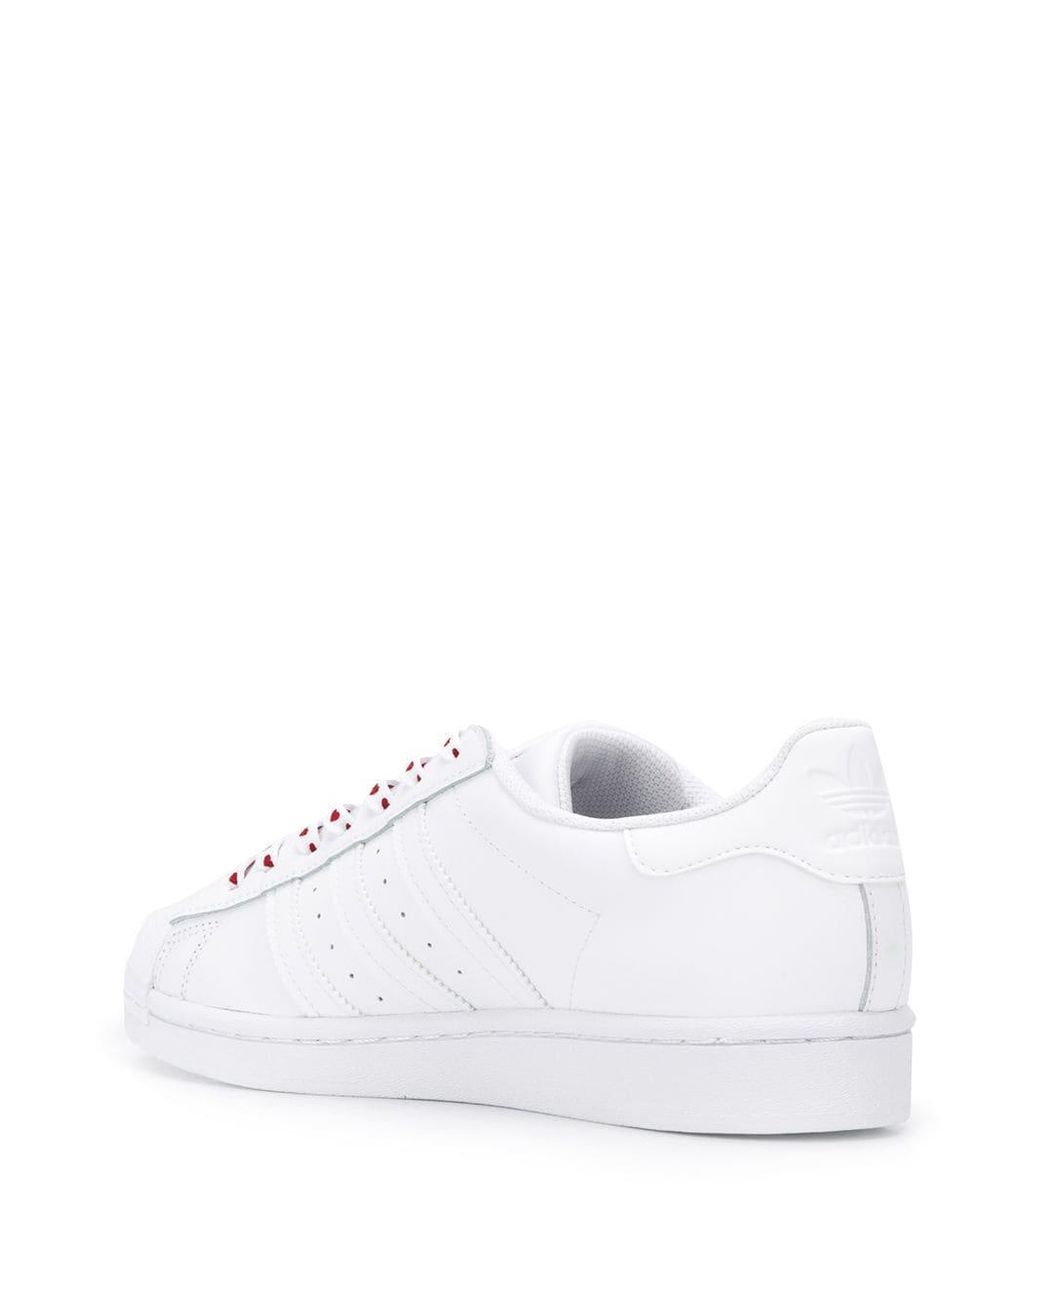 adidas Superstar Heart-print Sneakers in White | Lyst